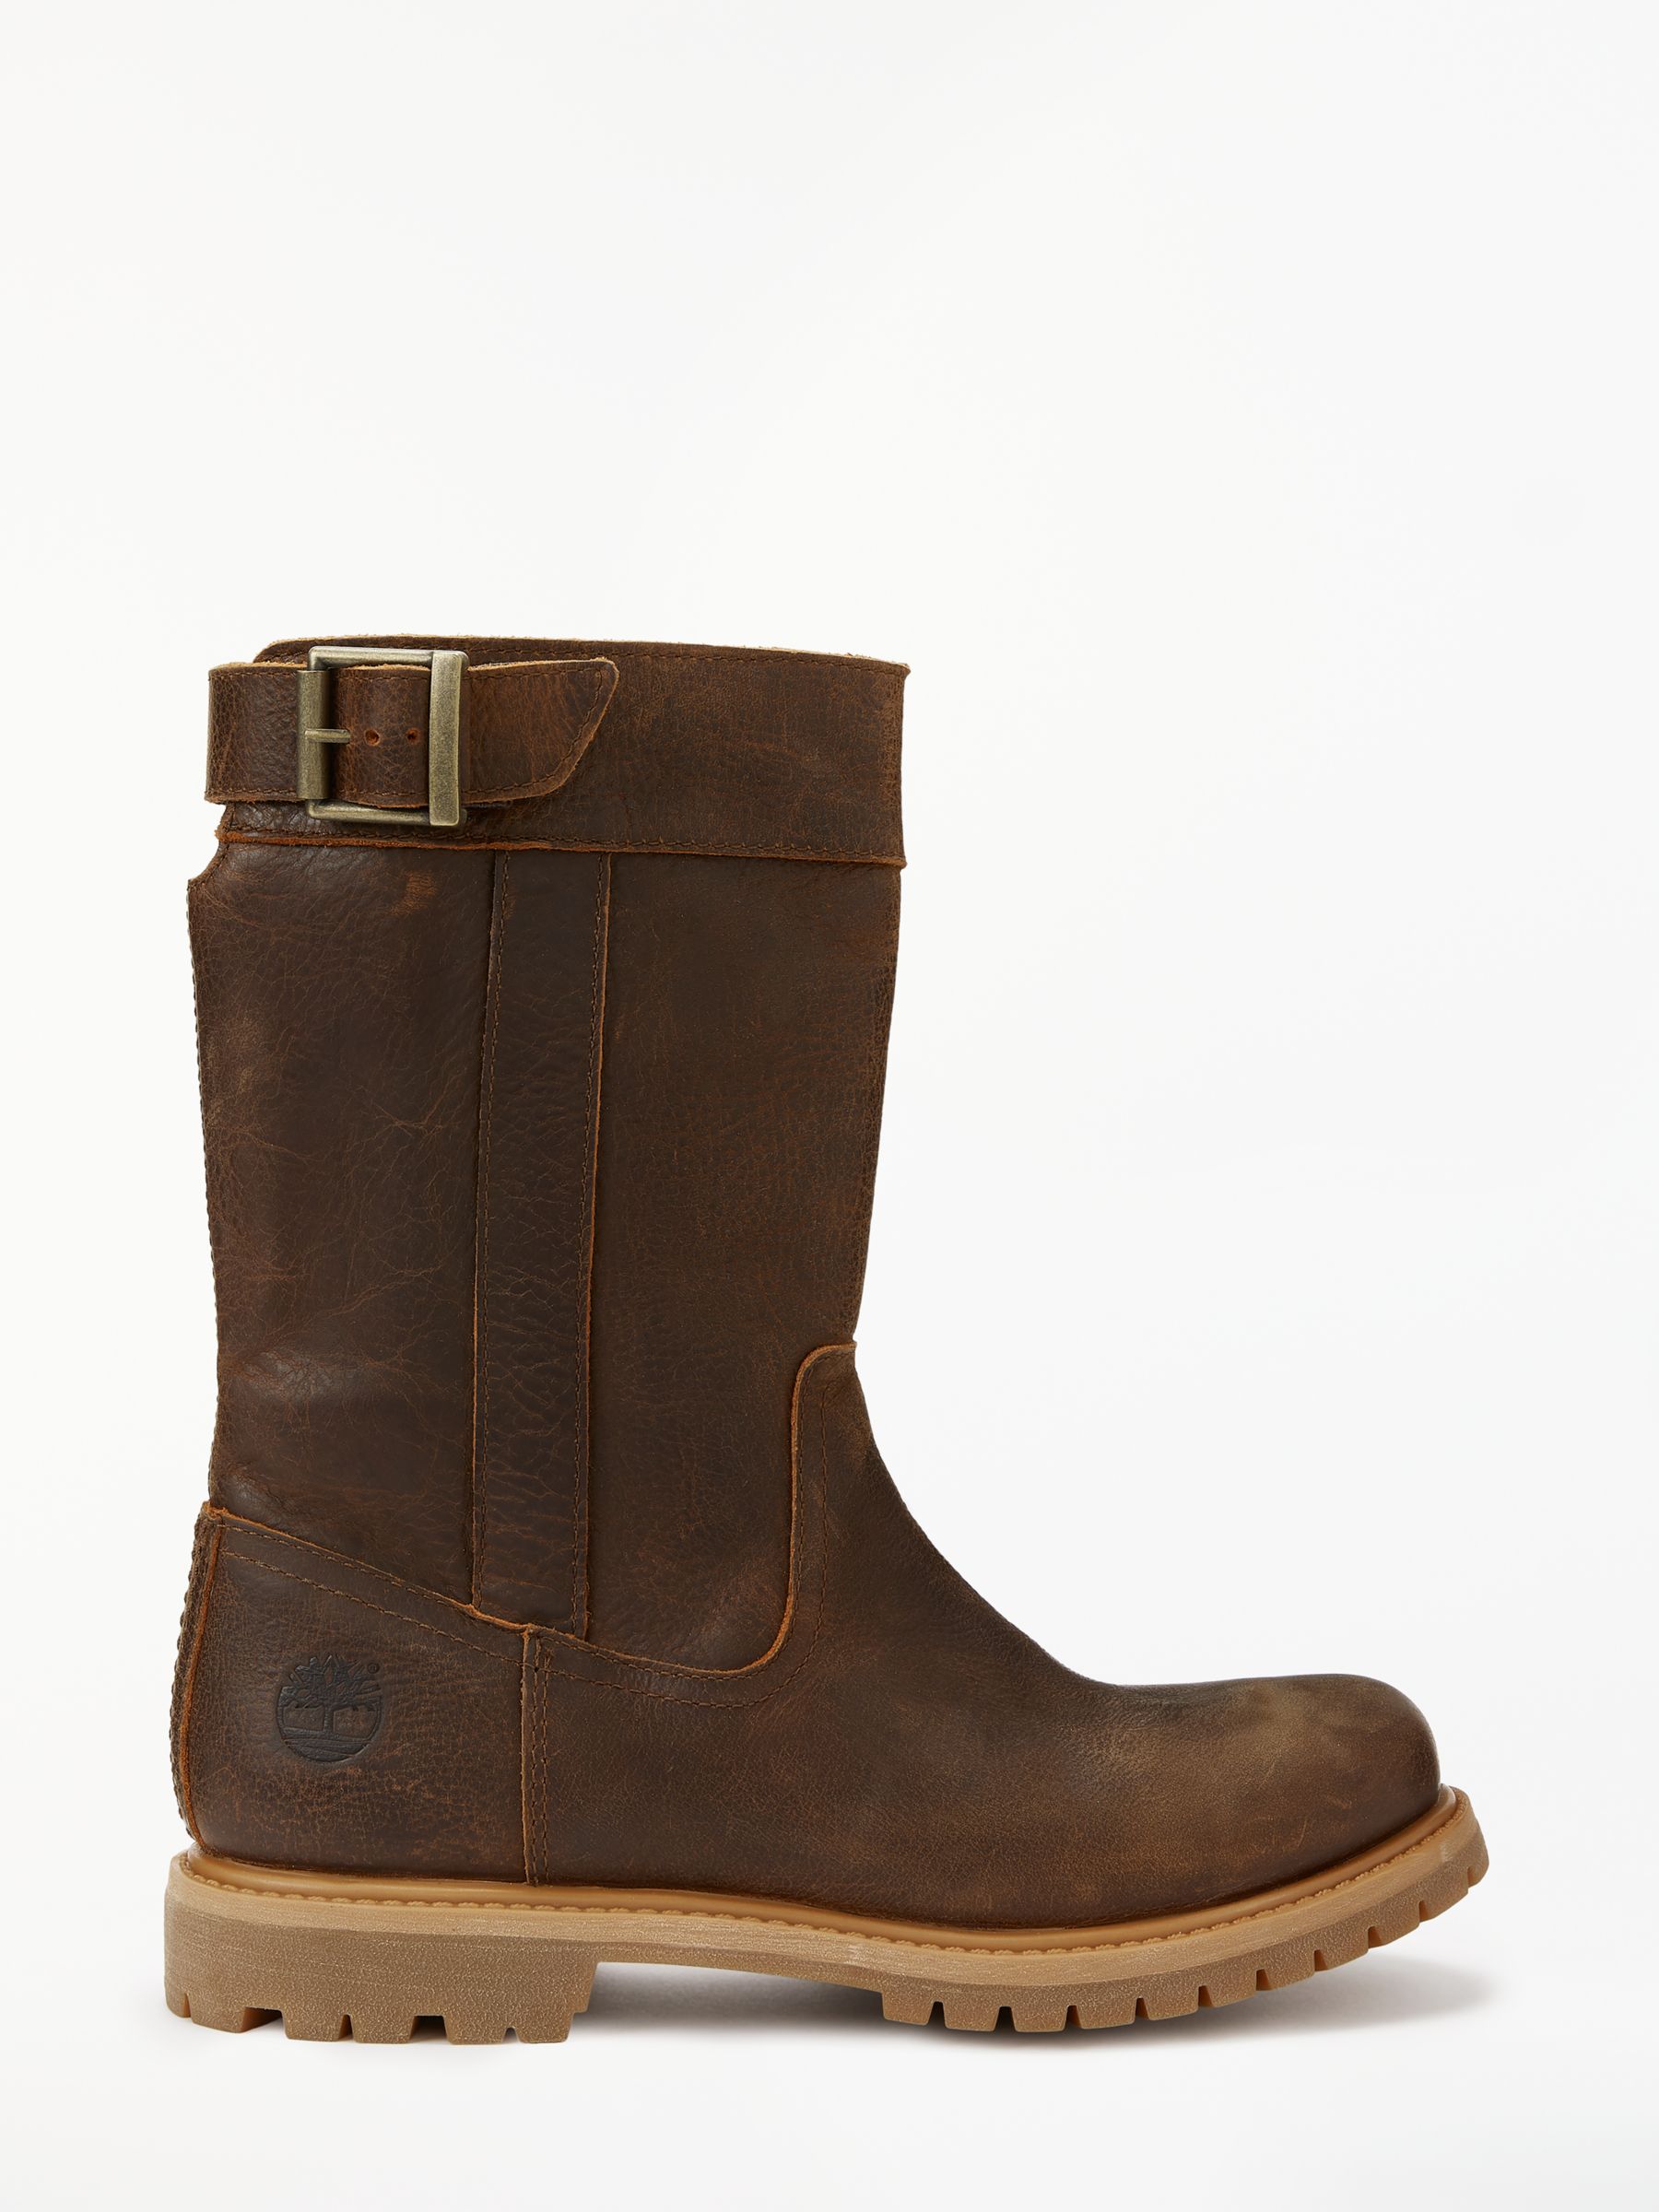 Waterproof Calf Boots, Brown Leather 